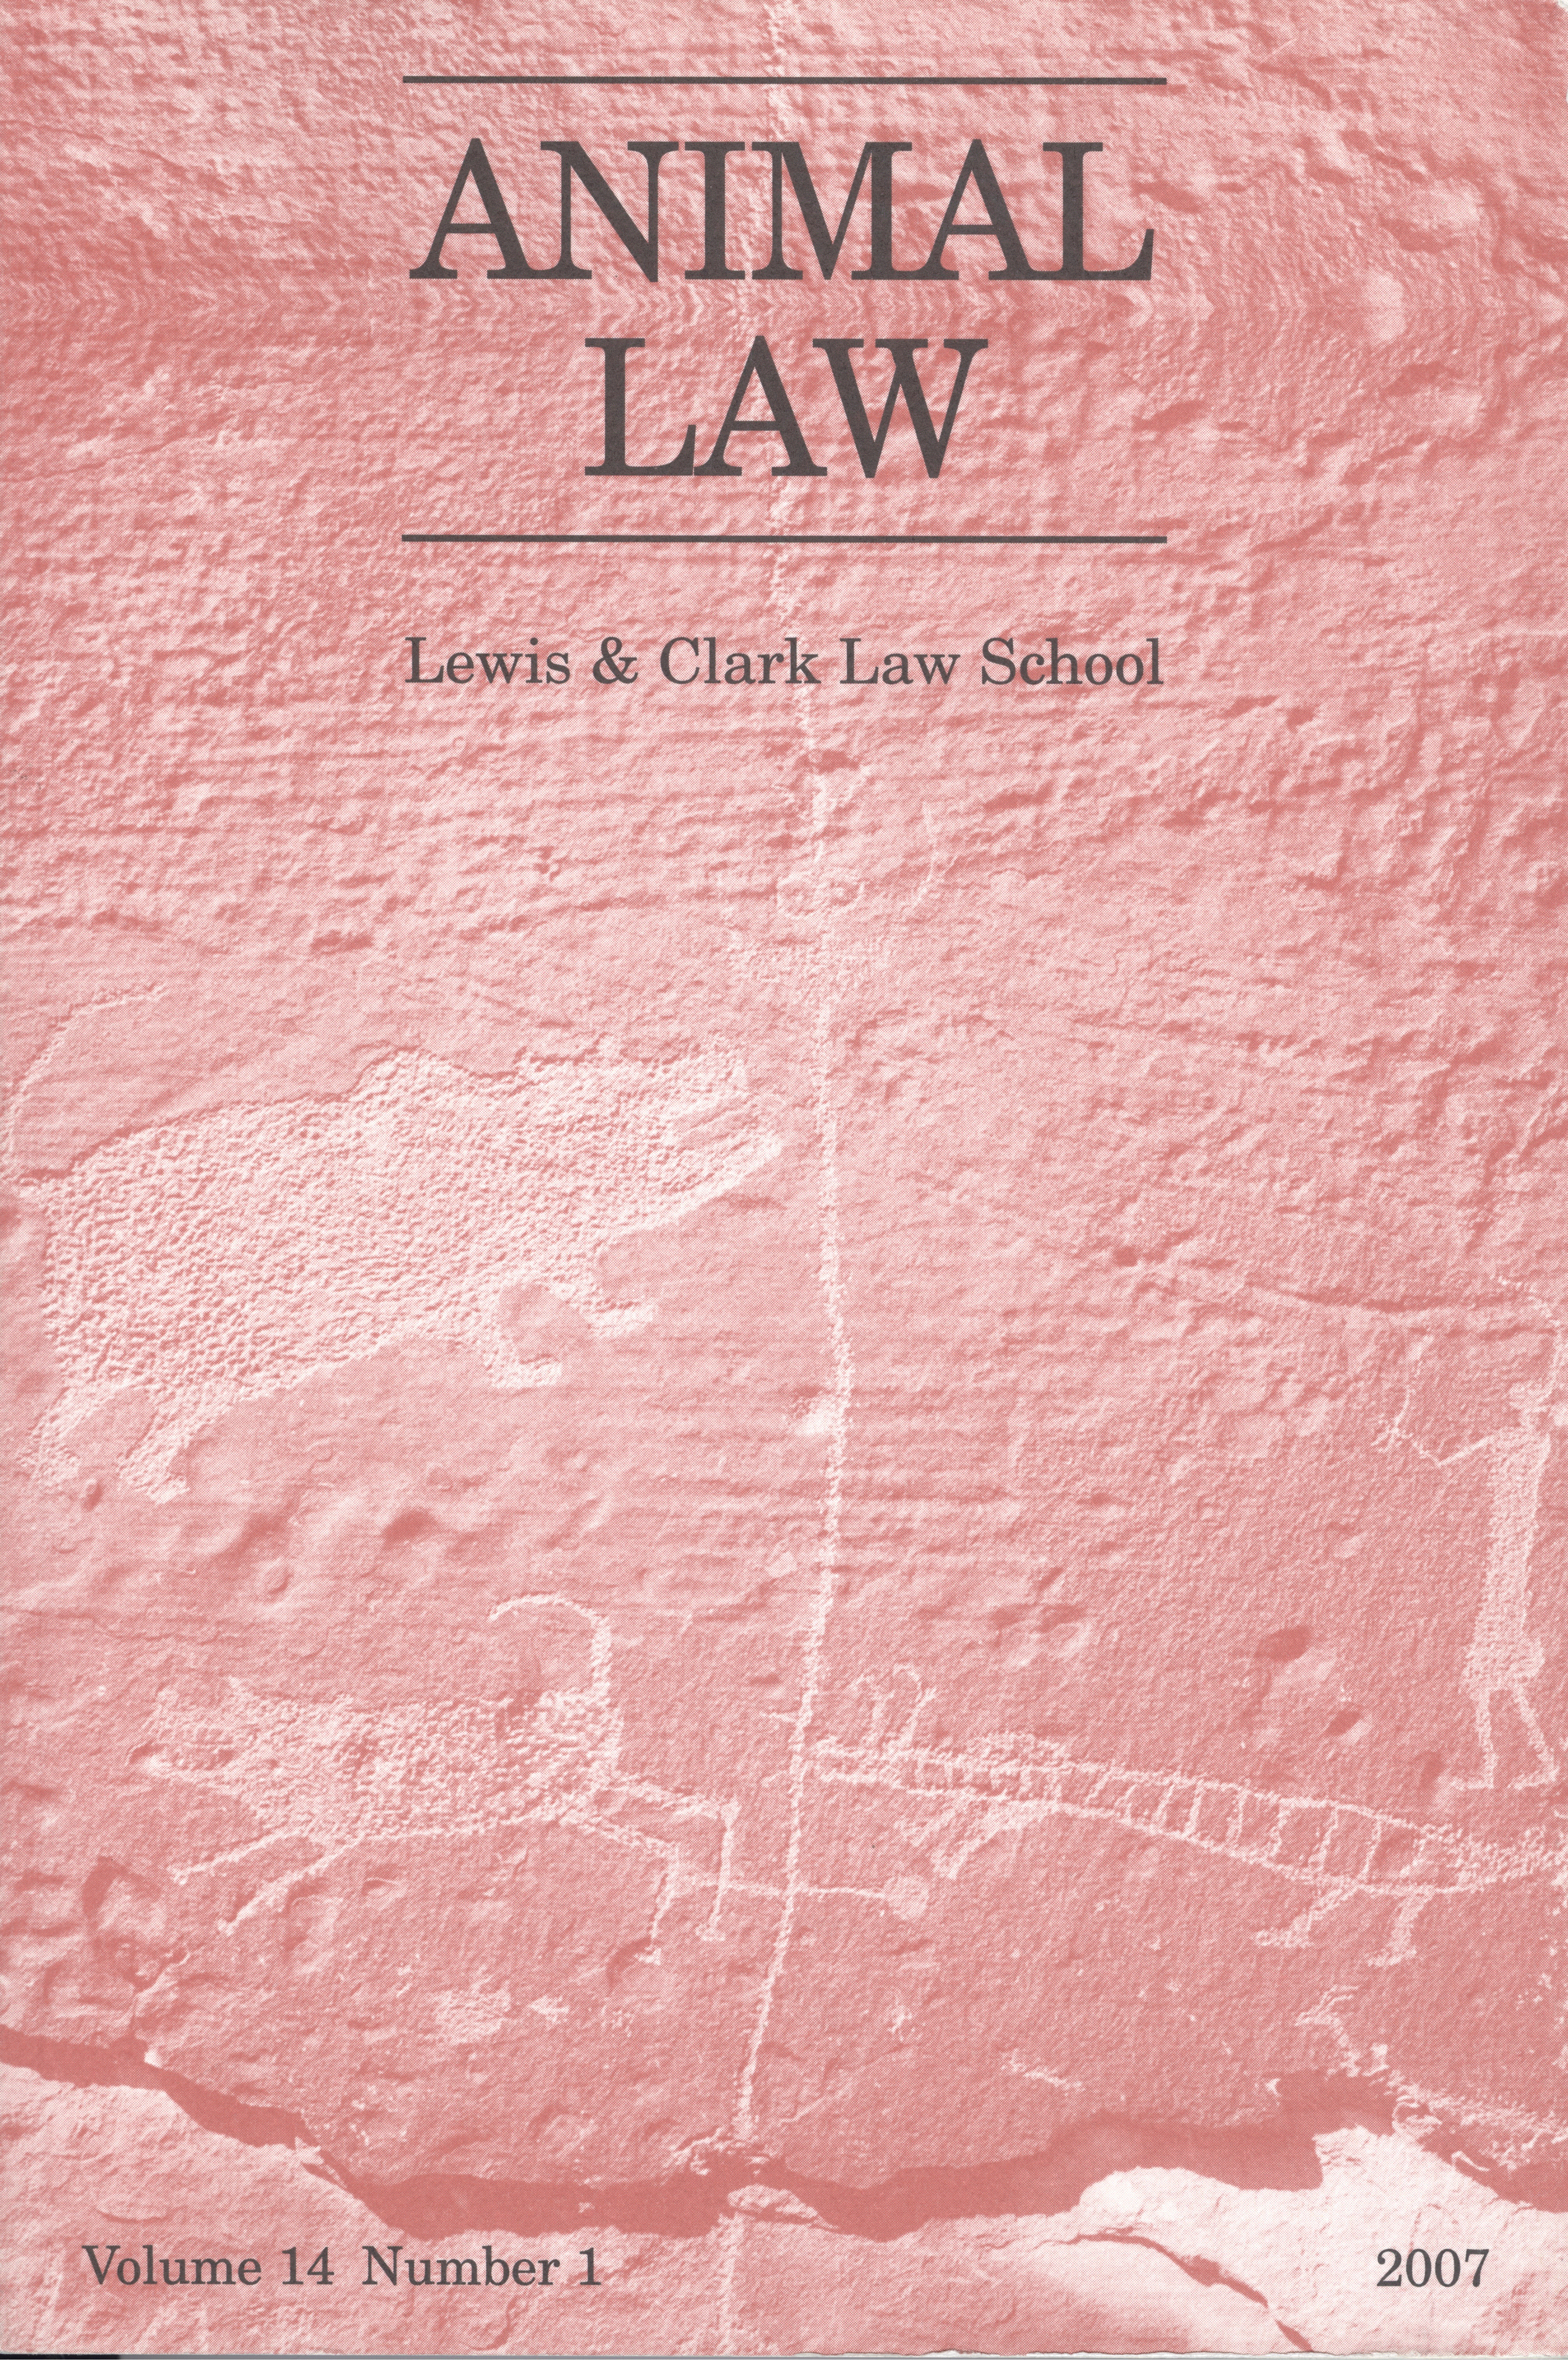 Cover of Animal Law Review Volume 14, Issue 1, 2007